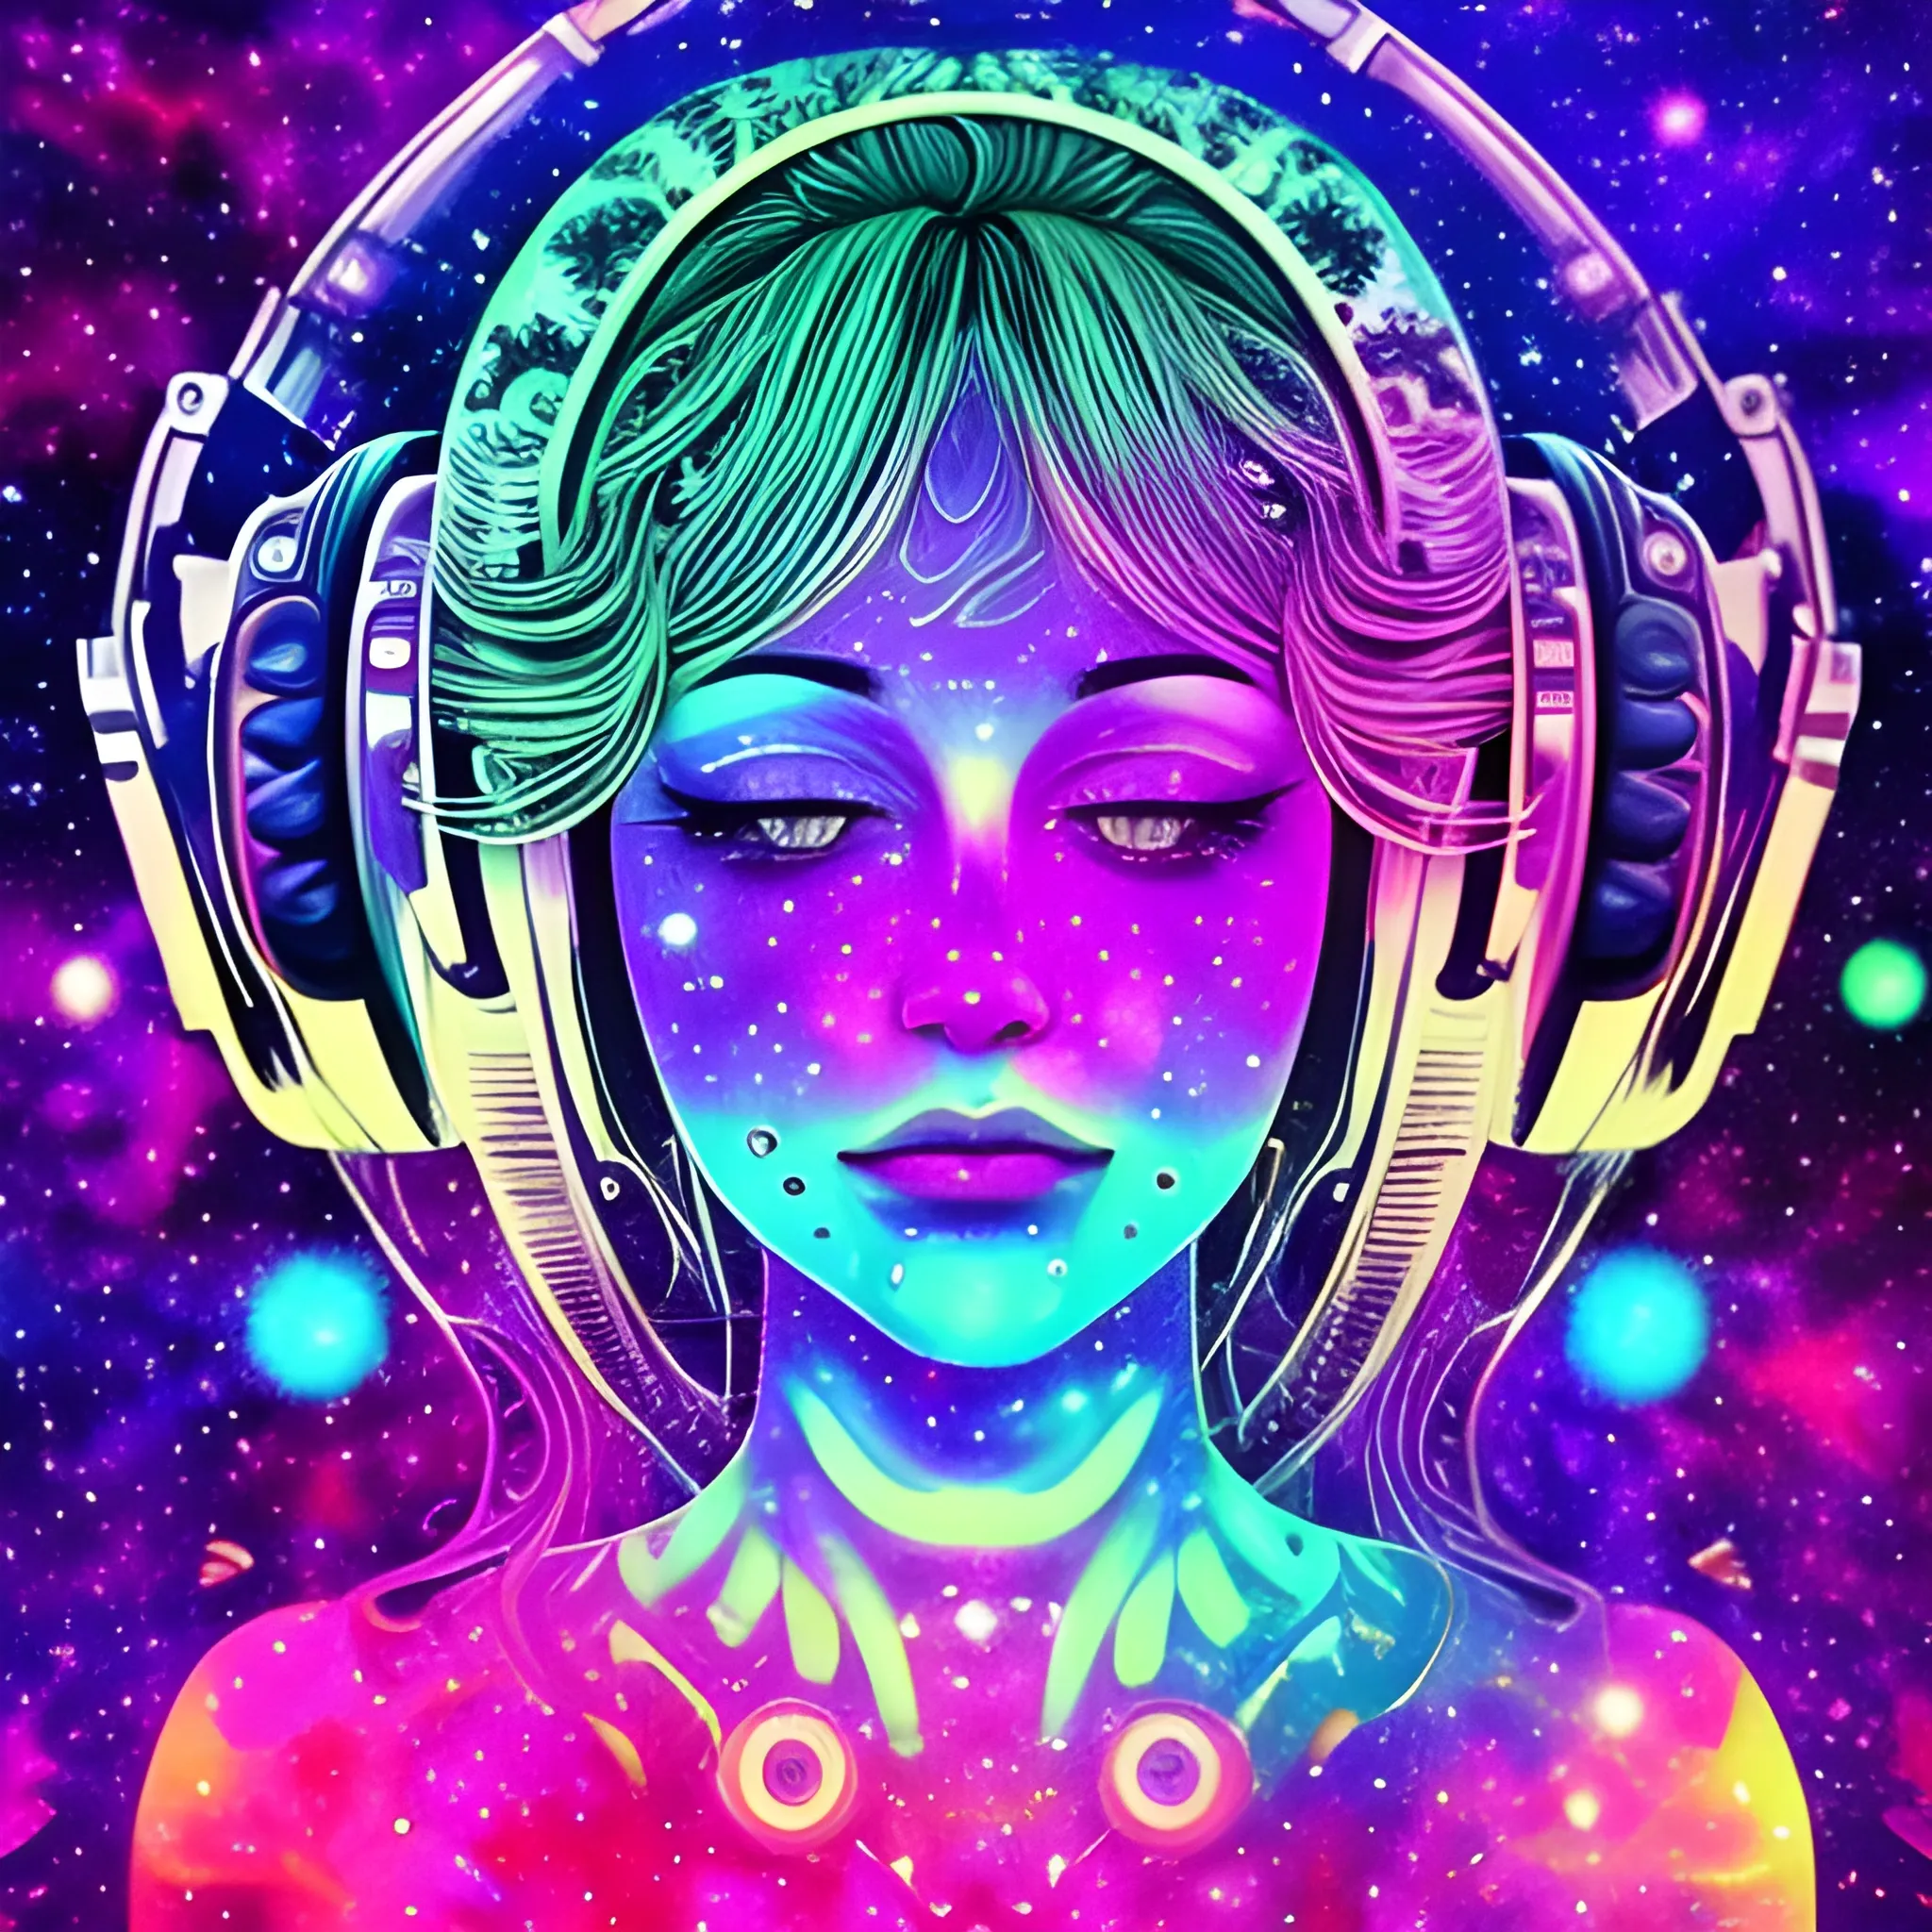 Trippy, eden, womens
, music, colorful, universe
